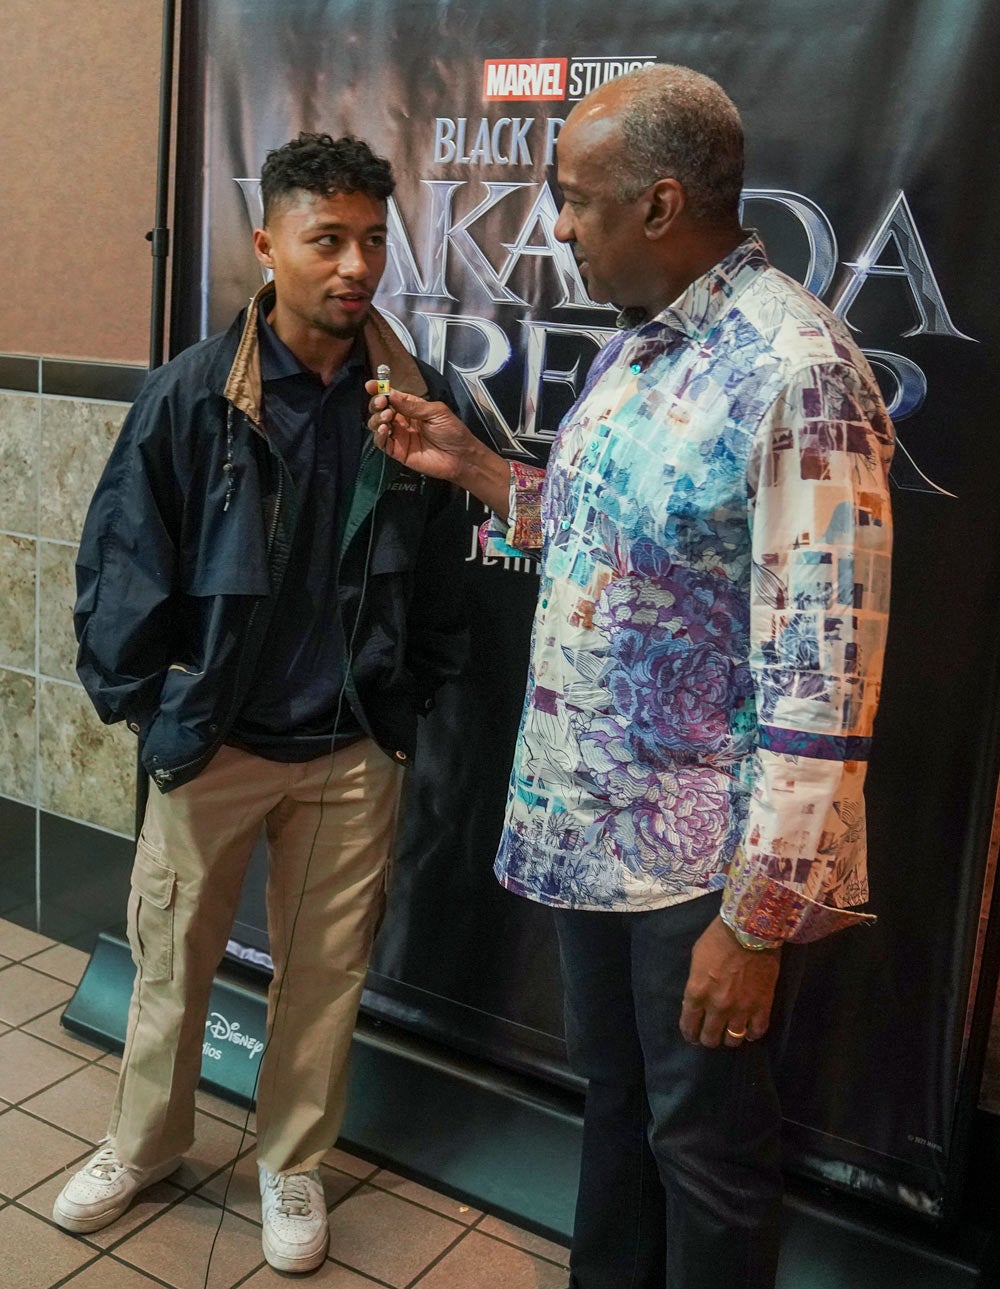 Chancellor May interviews student in front of "Wakanda Forever" poster